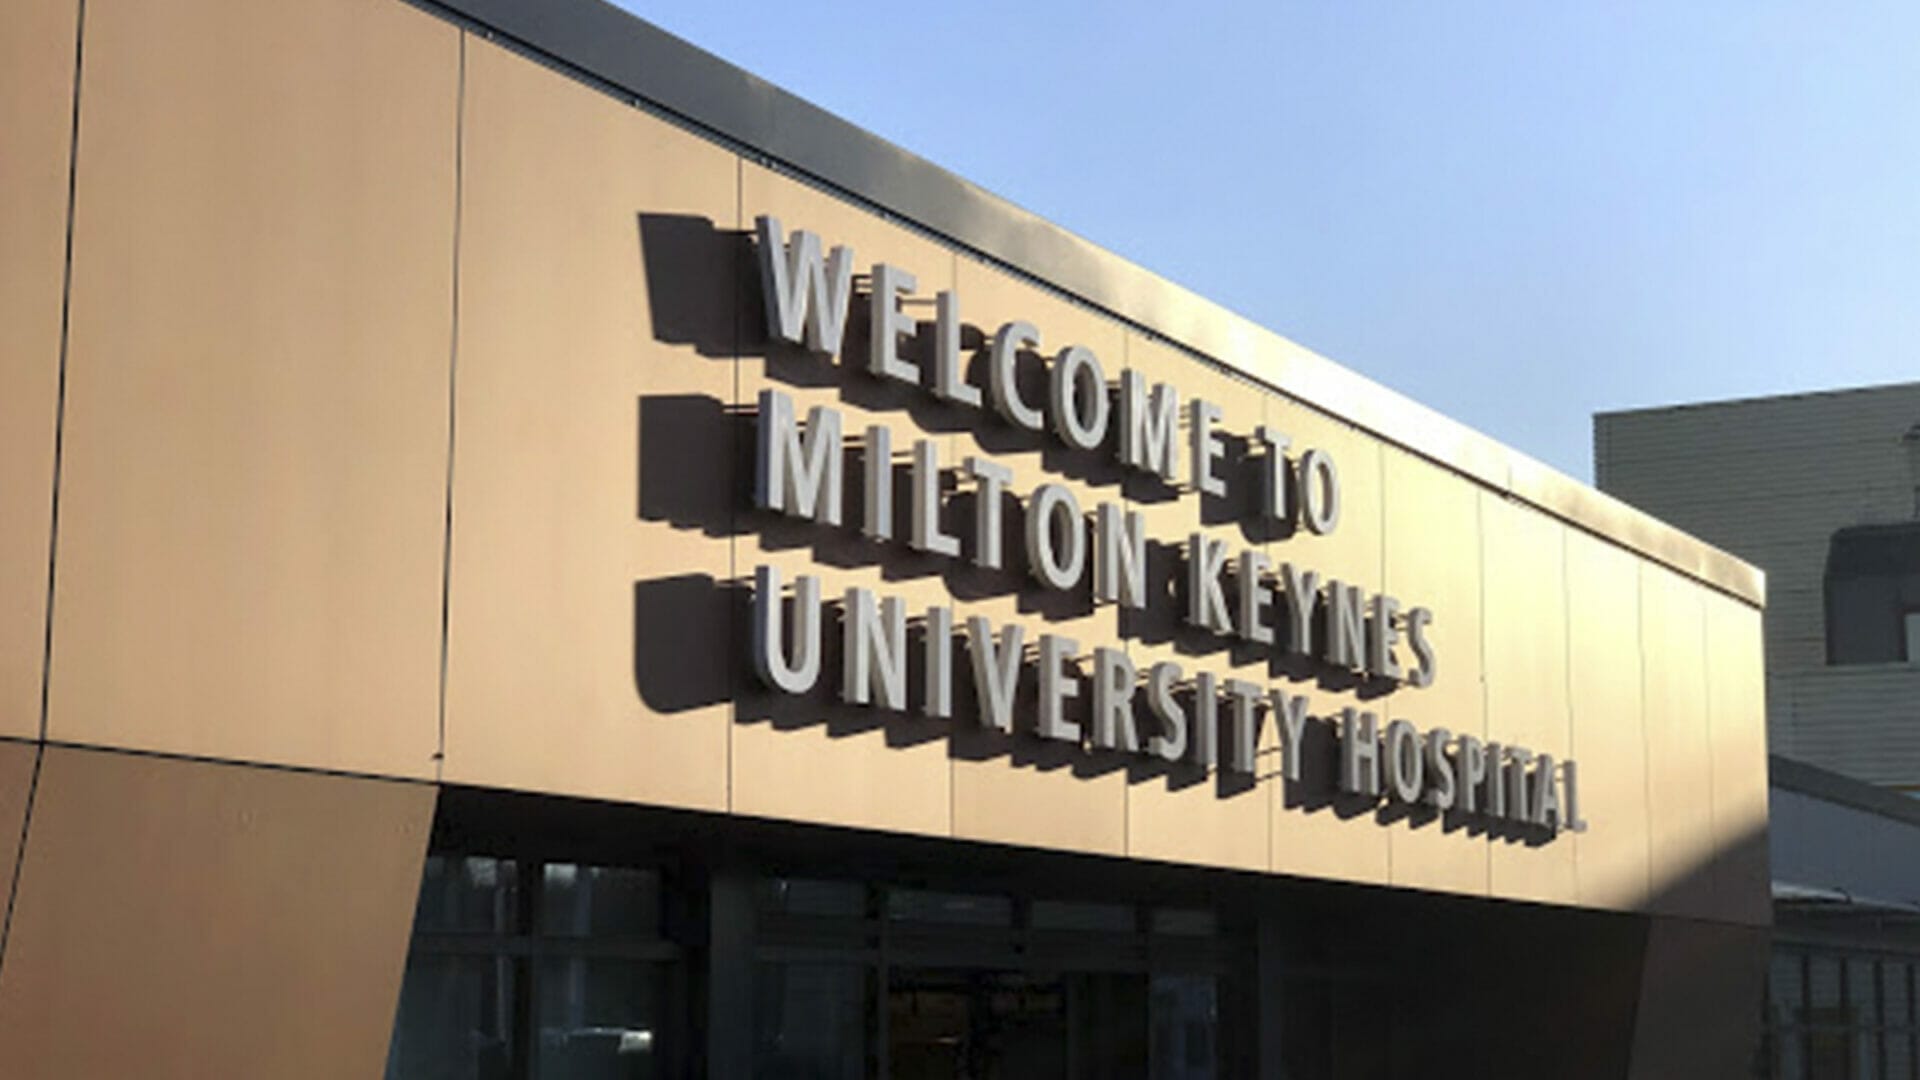 image of a sign saying 'Welcome to Milton Keynes University Hospital'